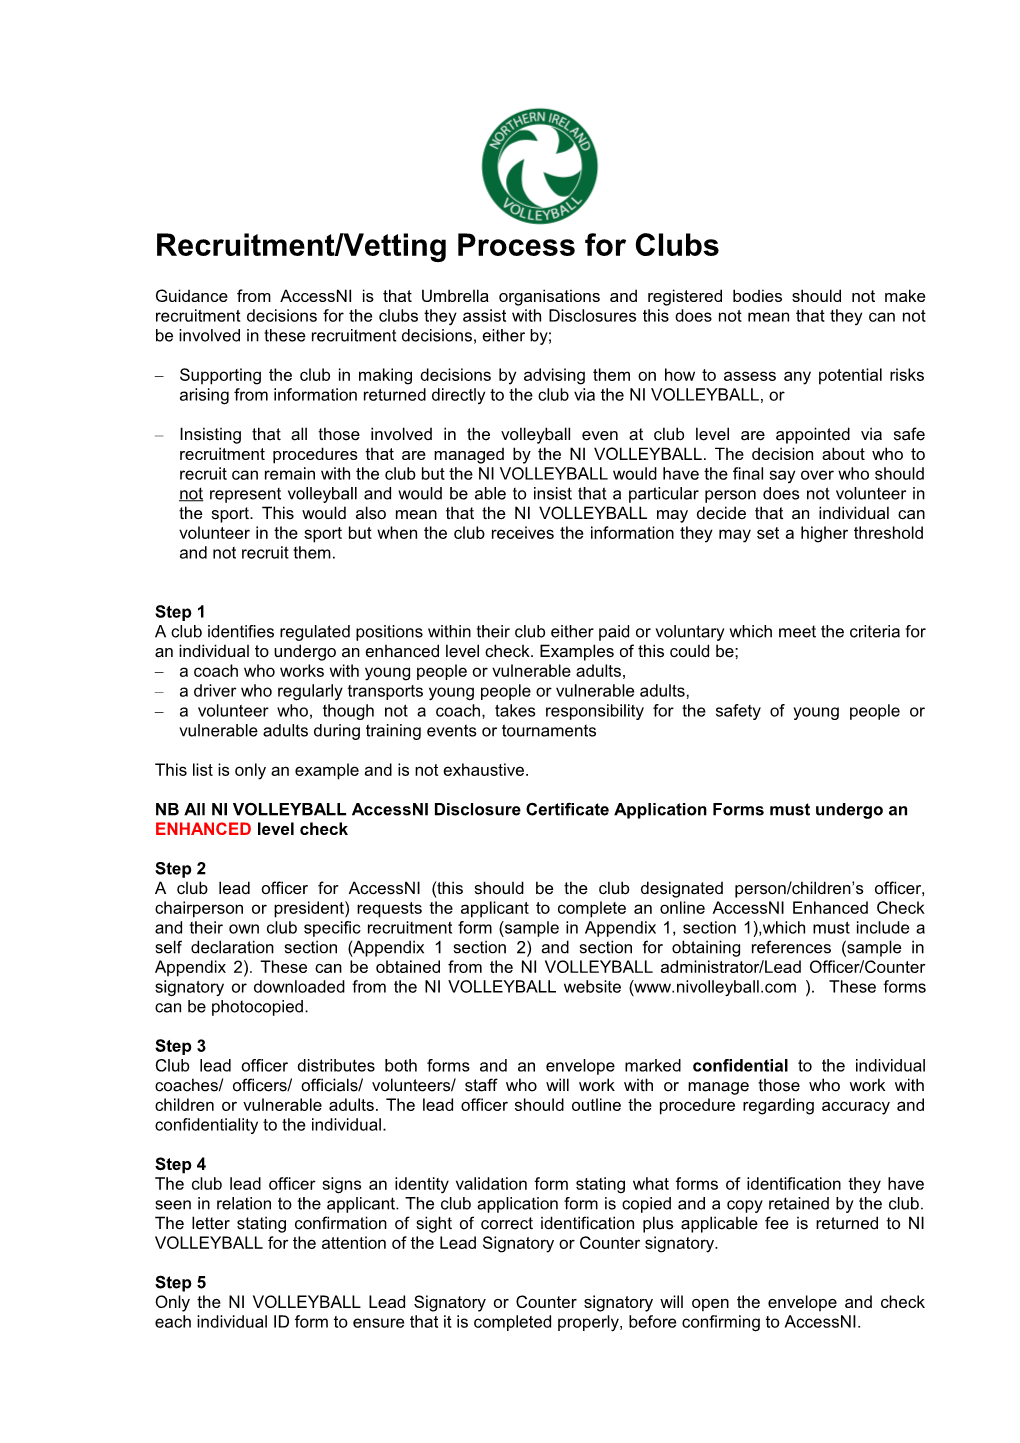 Vetting Process for Club S Using Their Sports Governing Body As an Umbrella Organisation